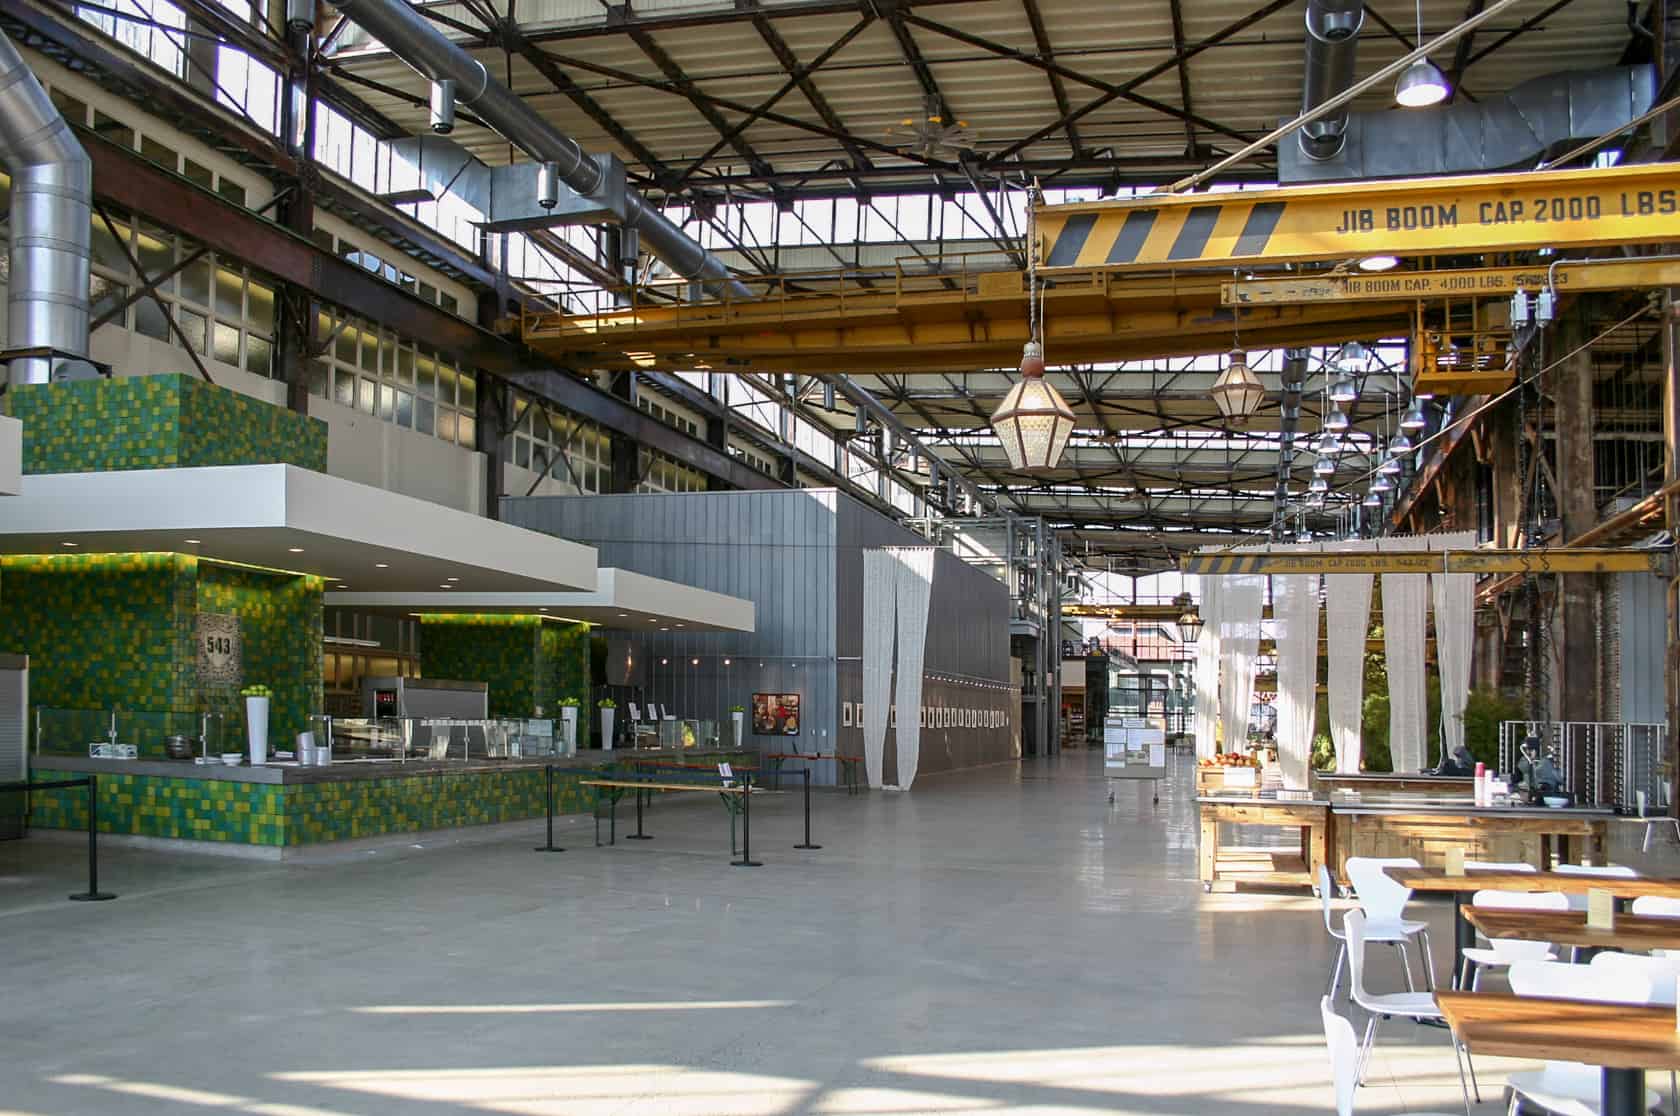 Urban Outfitters Corporate Campus MSR Design ArchDaily, 51% OFF